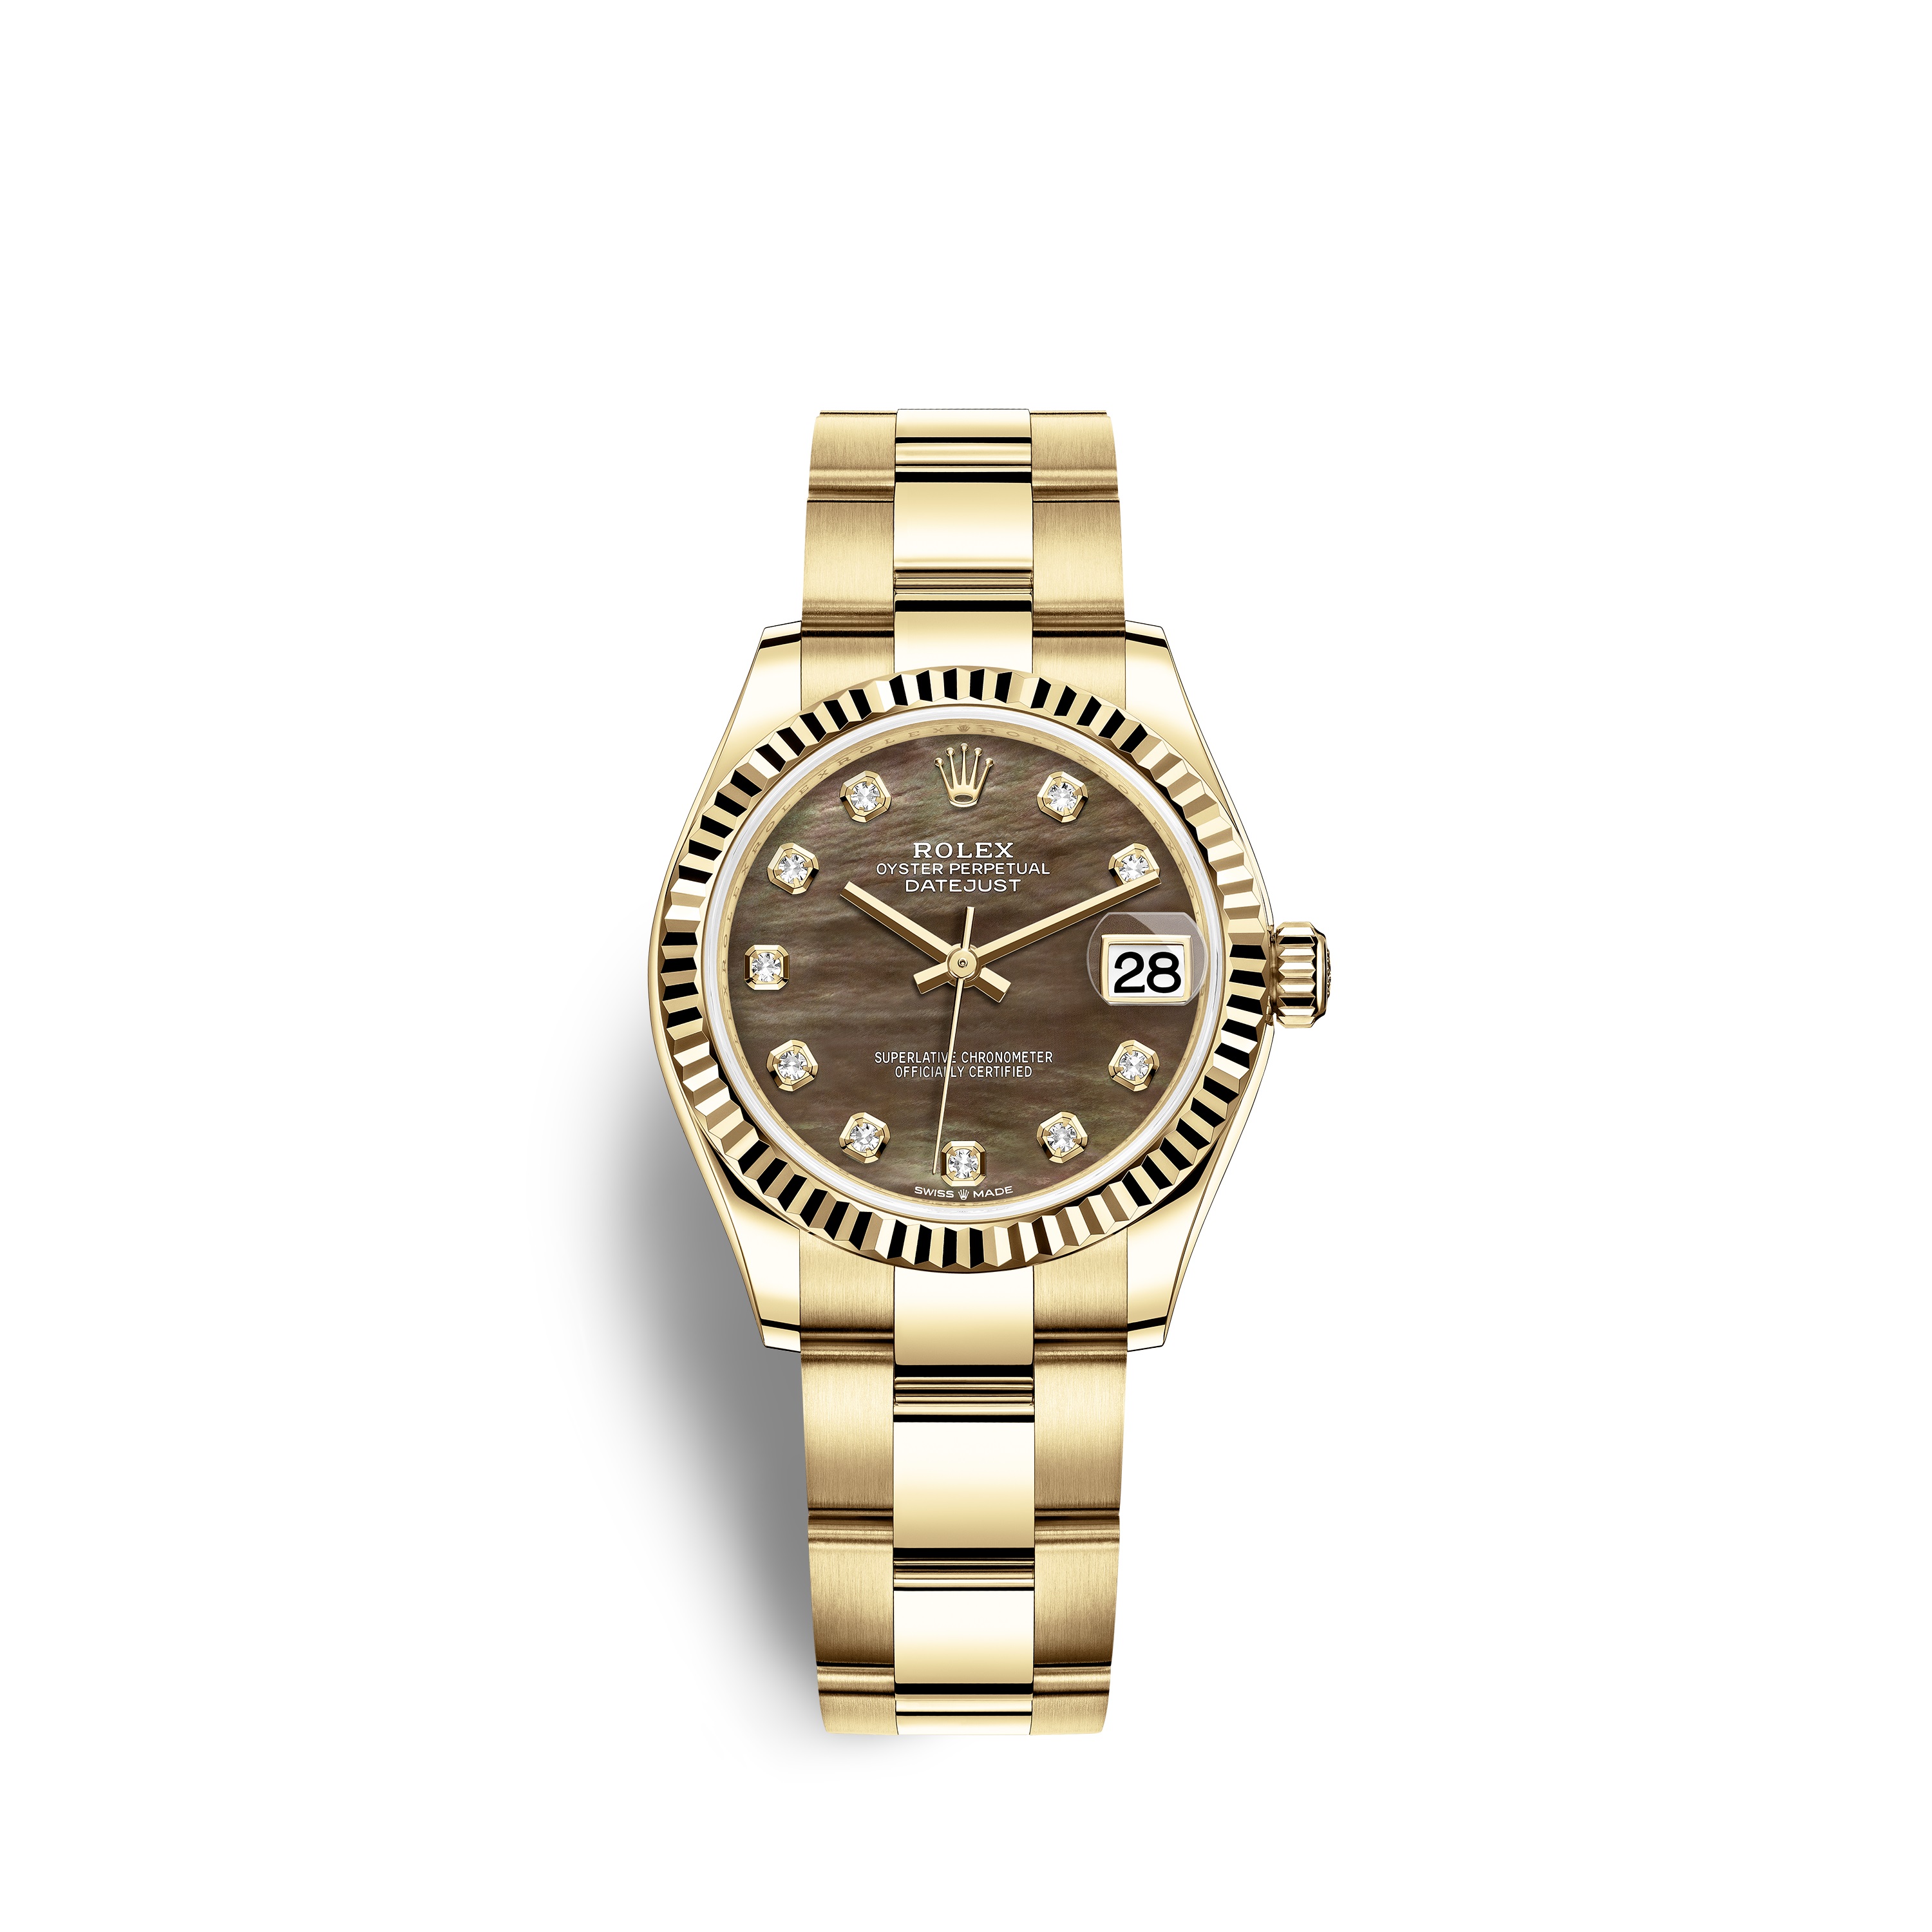 Datejust 31 278278 Gold Watch (Black Mother-of-Pearl Set with Diamonds)